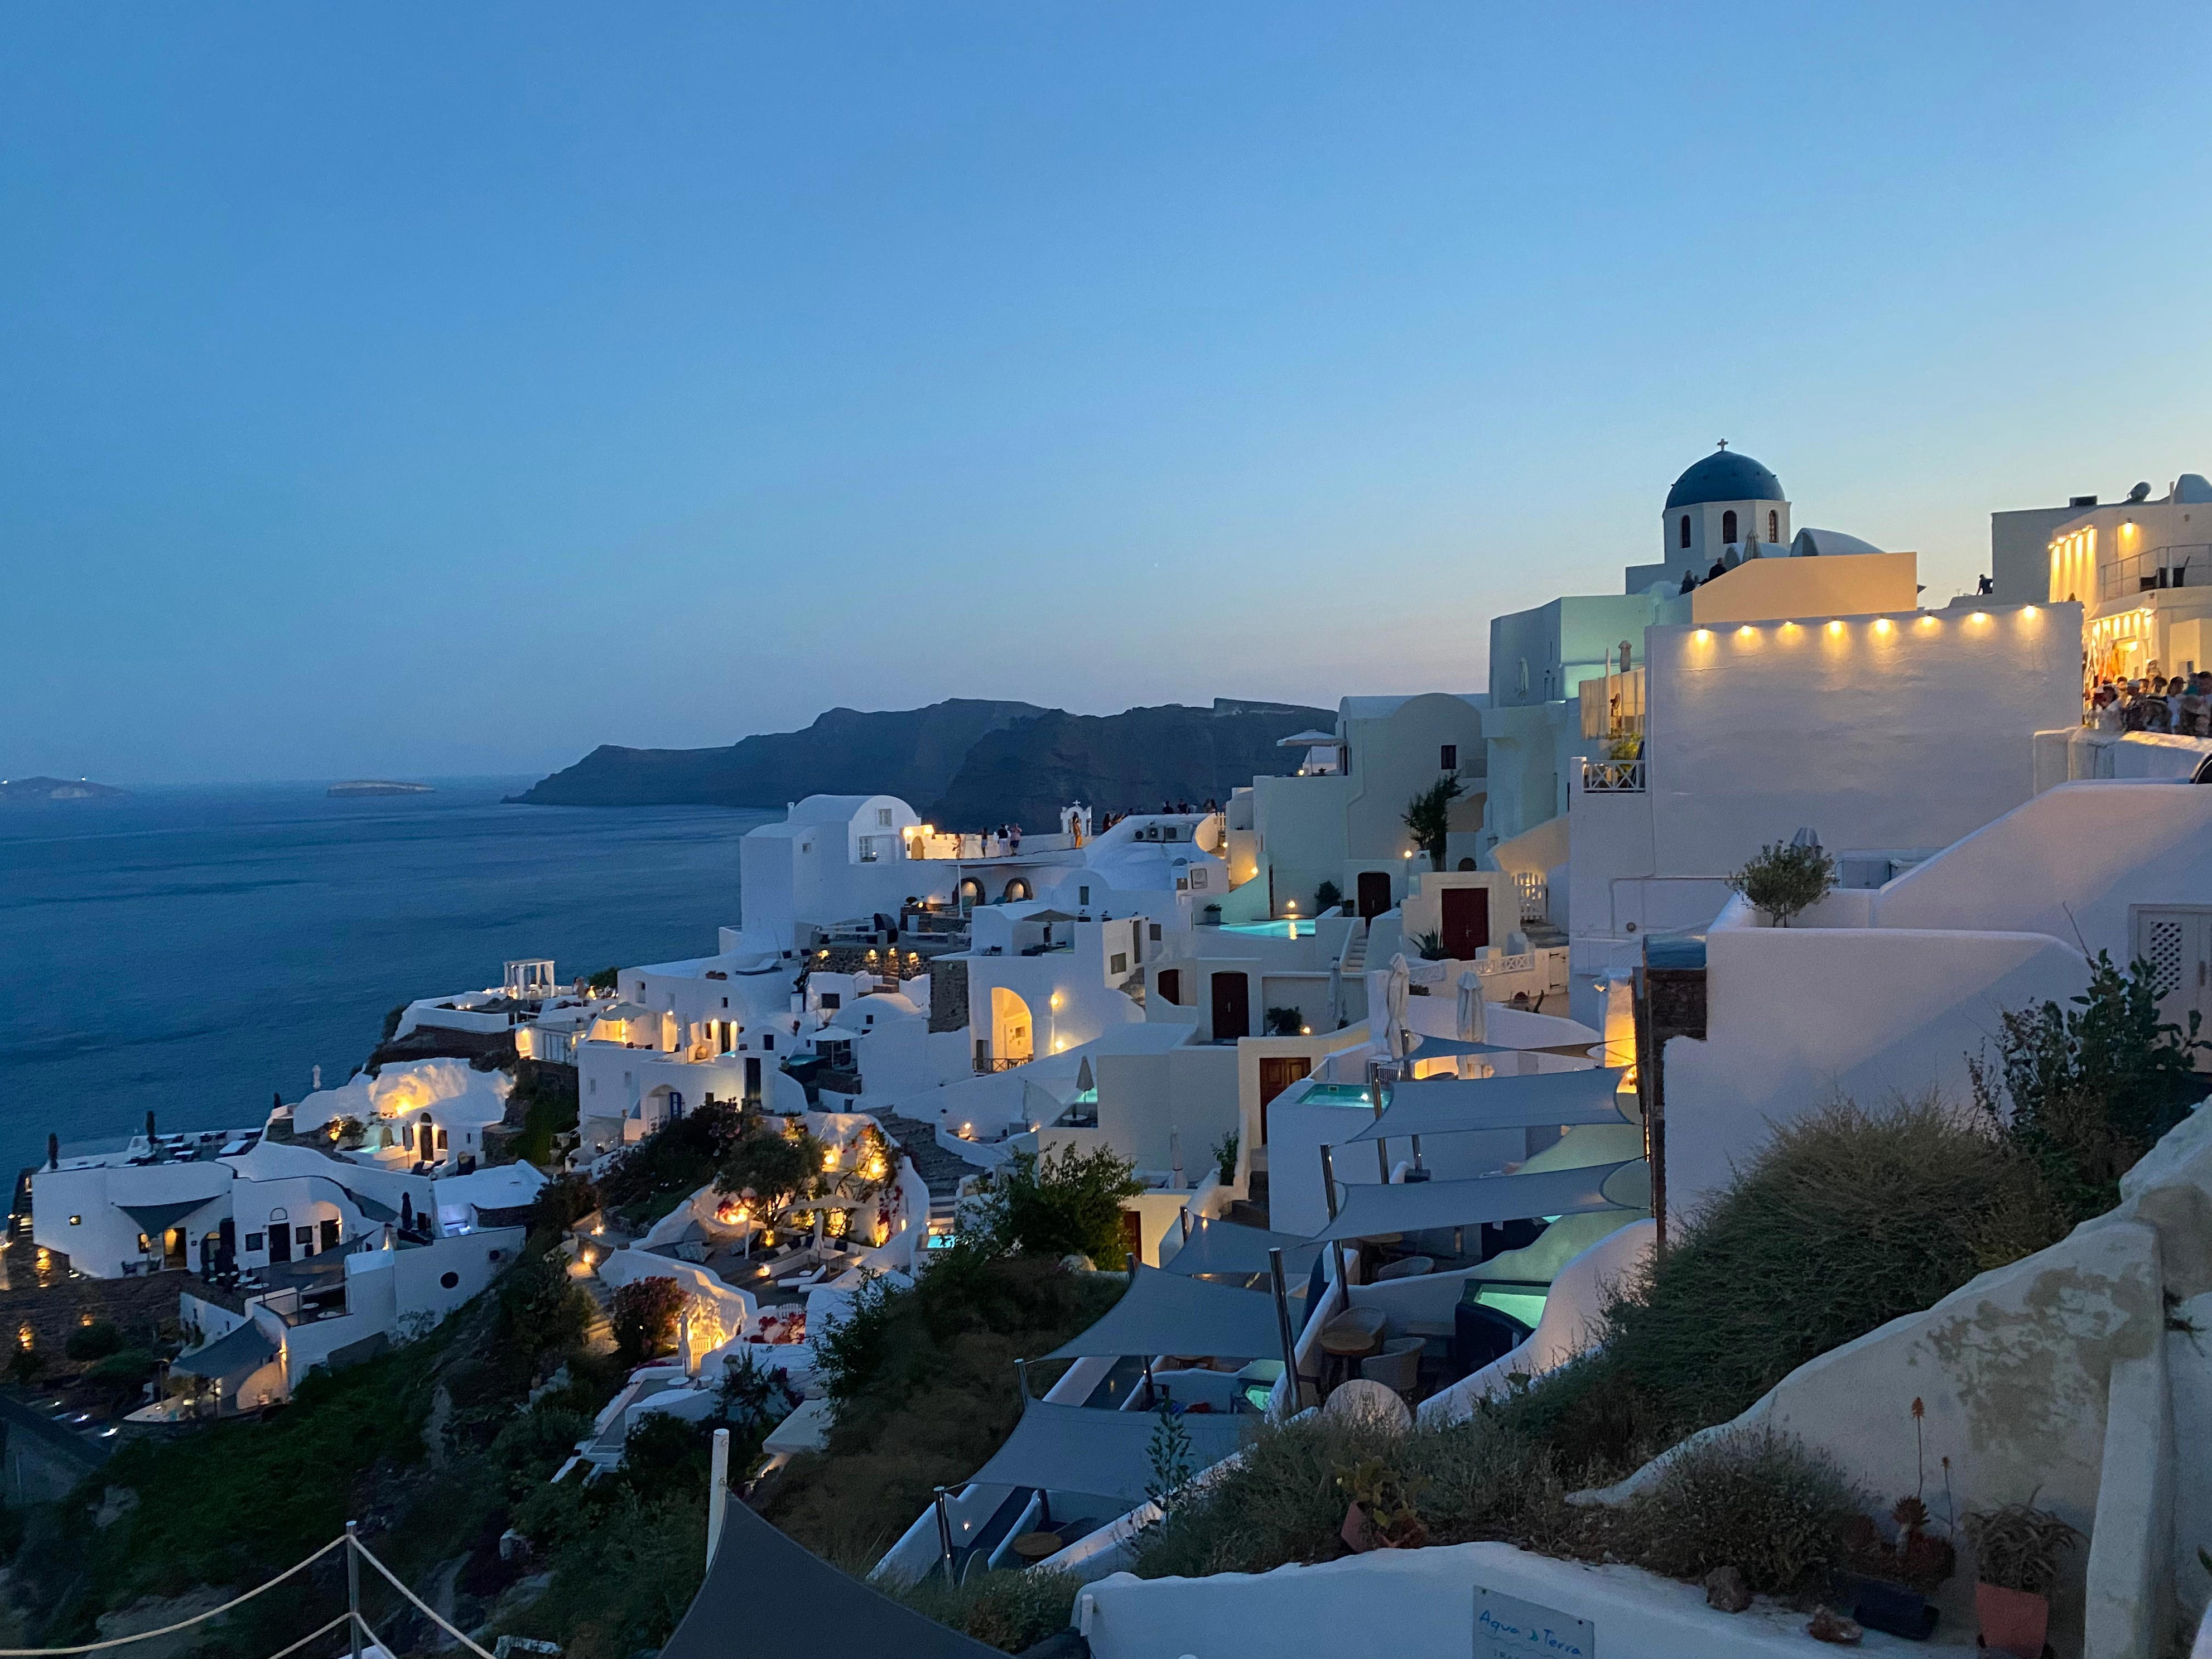 <p>Since Athens is a big walking city and Mykonos is known to be a party island, we were grateful to have the two relaxing islands, Naxos and Santorini, at the latter end of the trip.</p><p>After an exhausting few days, I appreciated the serenity of the quiet islands that much more.</p>